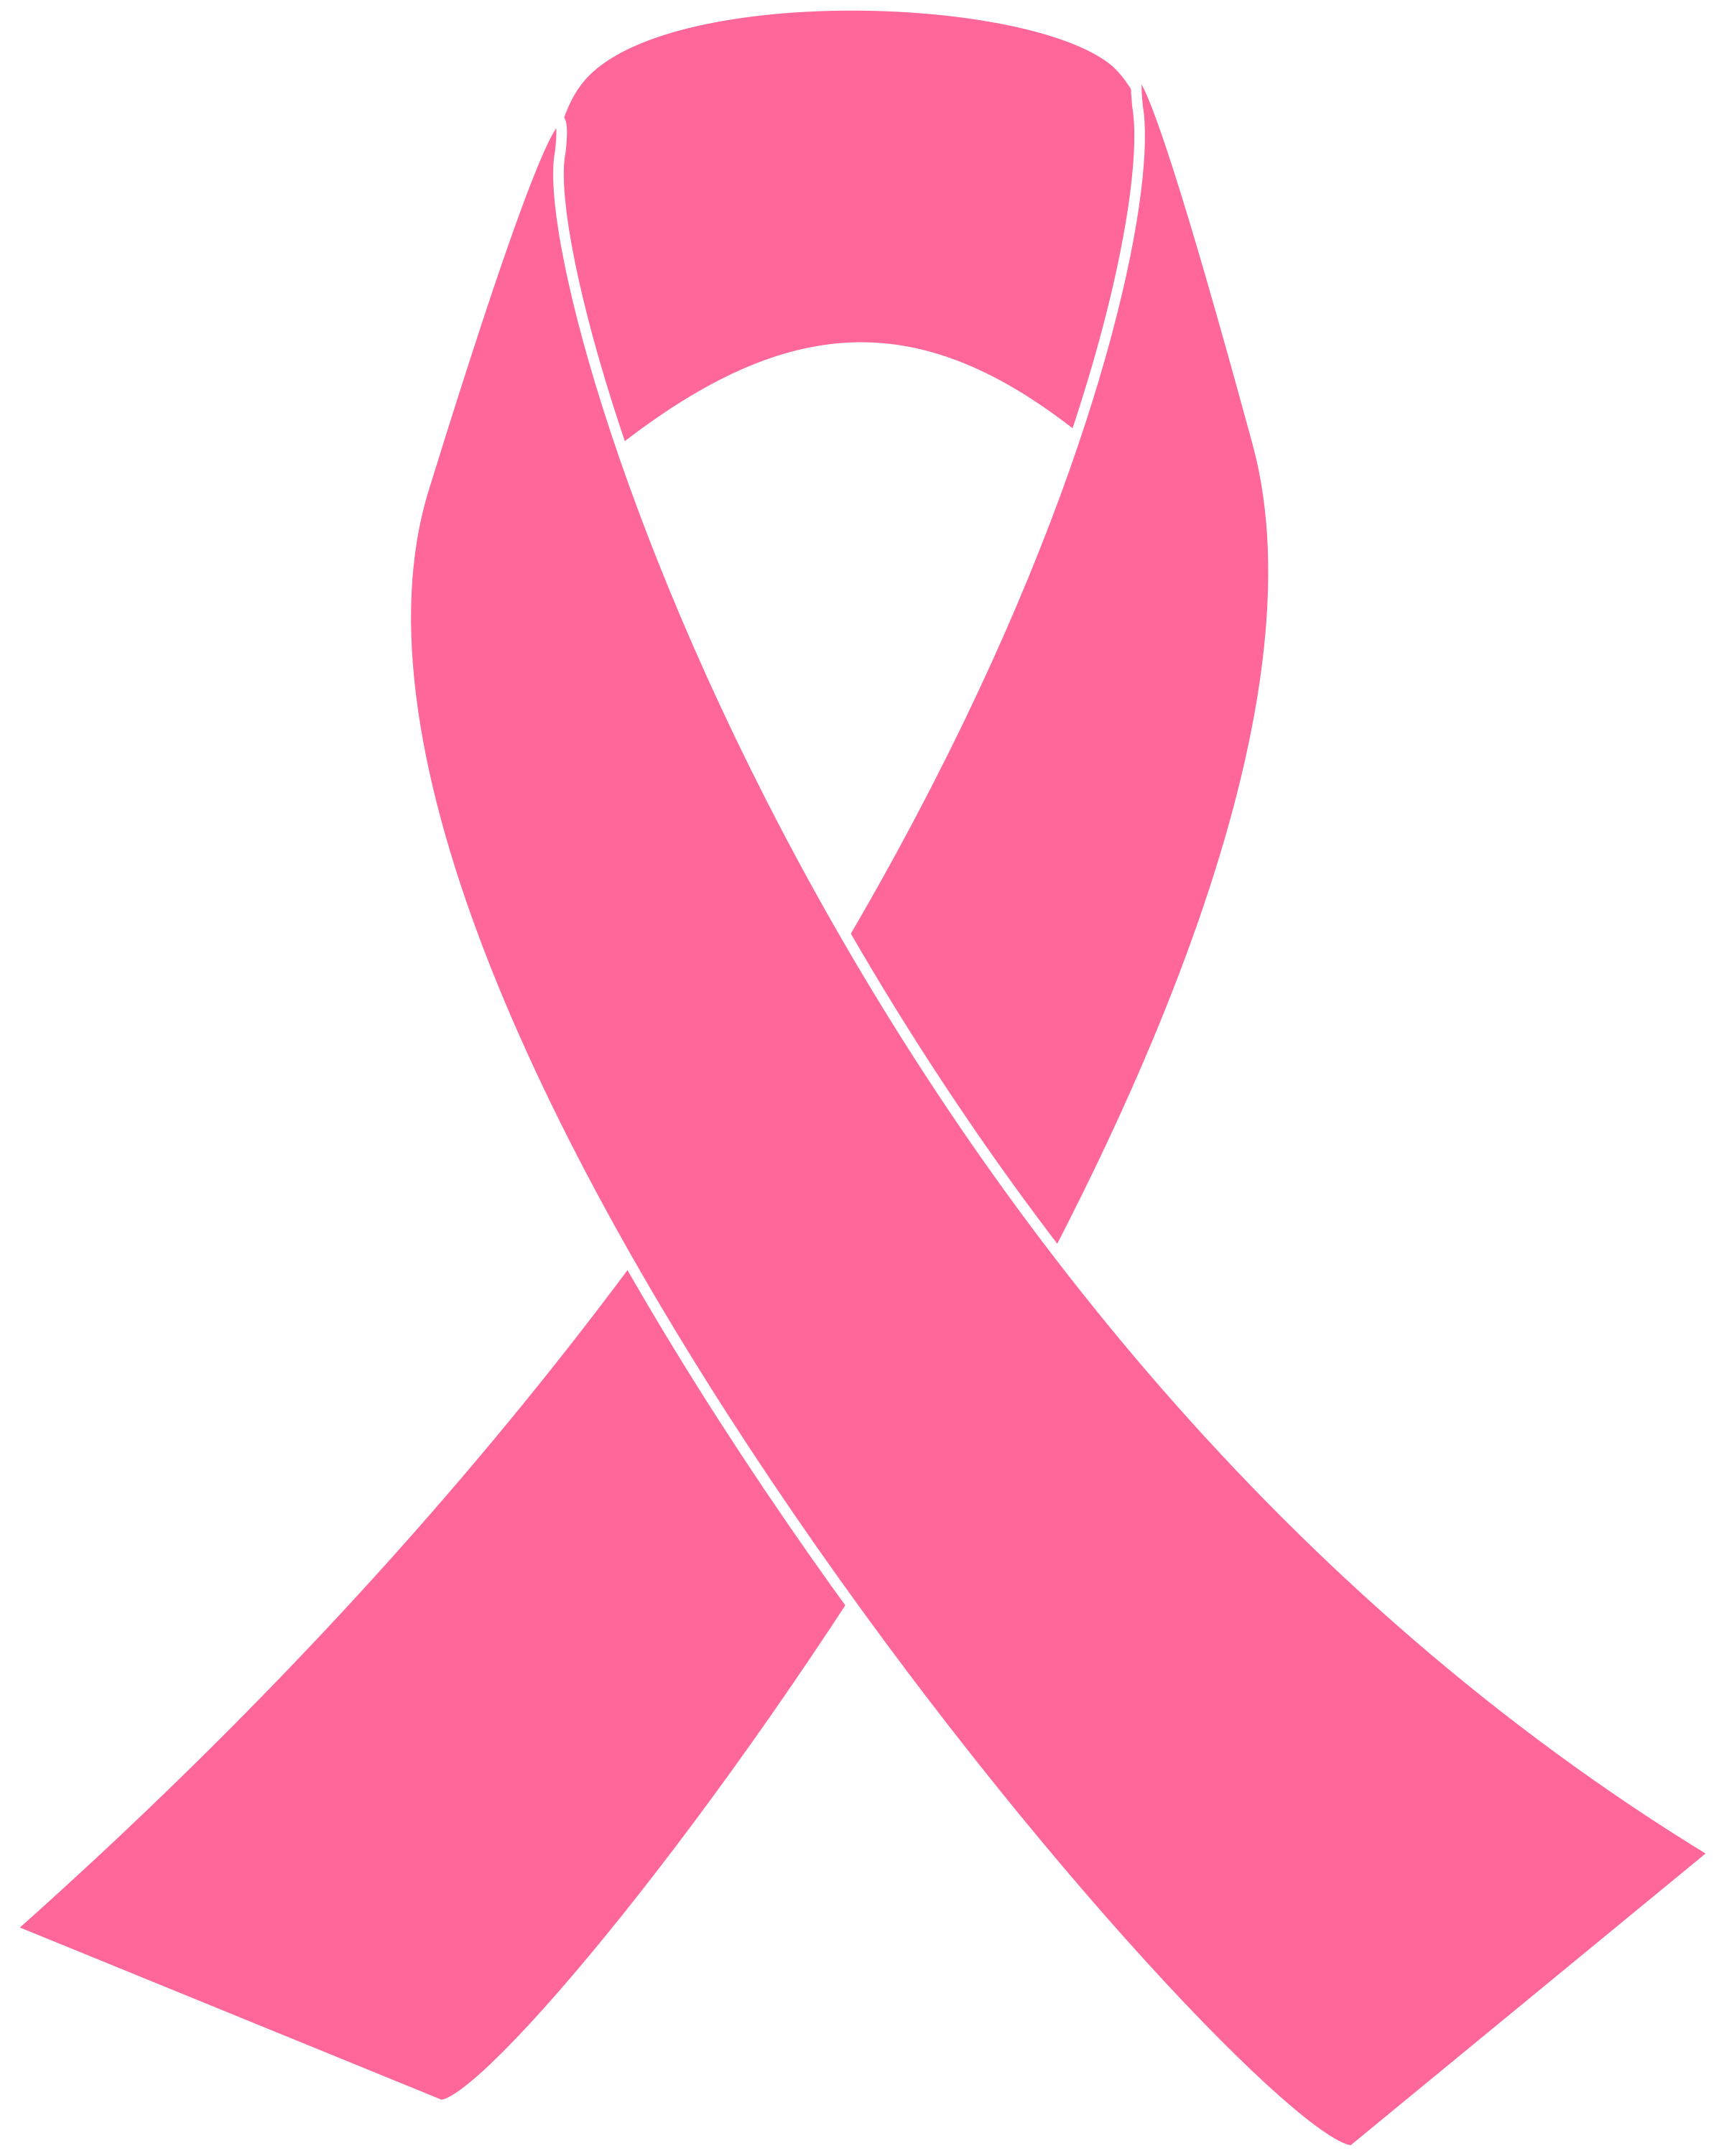 Think Pink and Save Lives